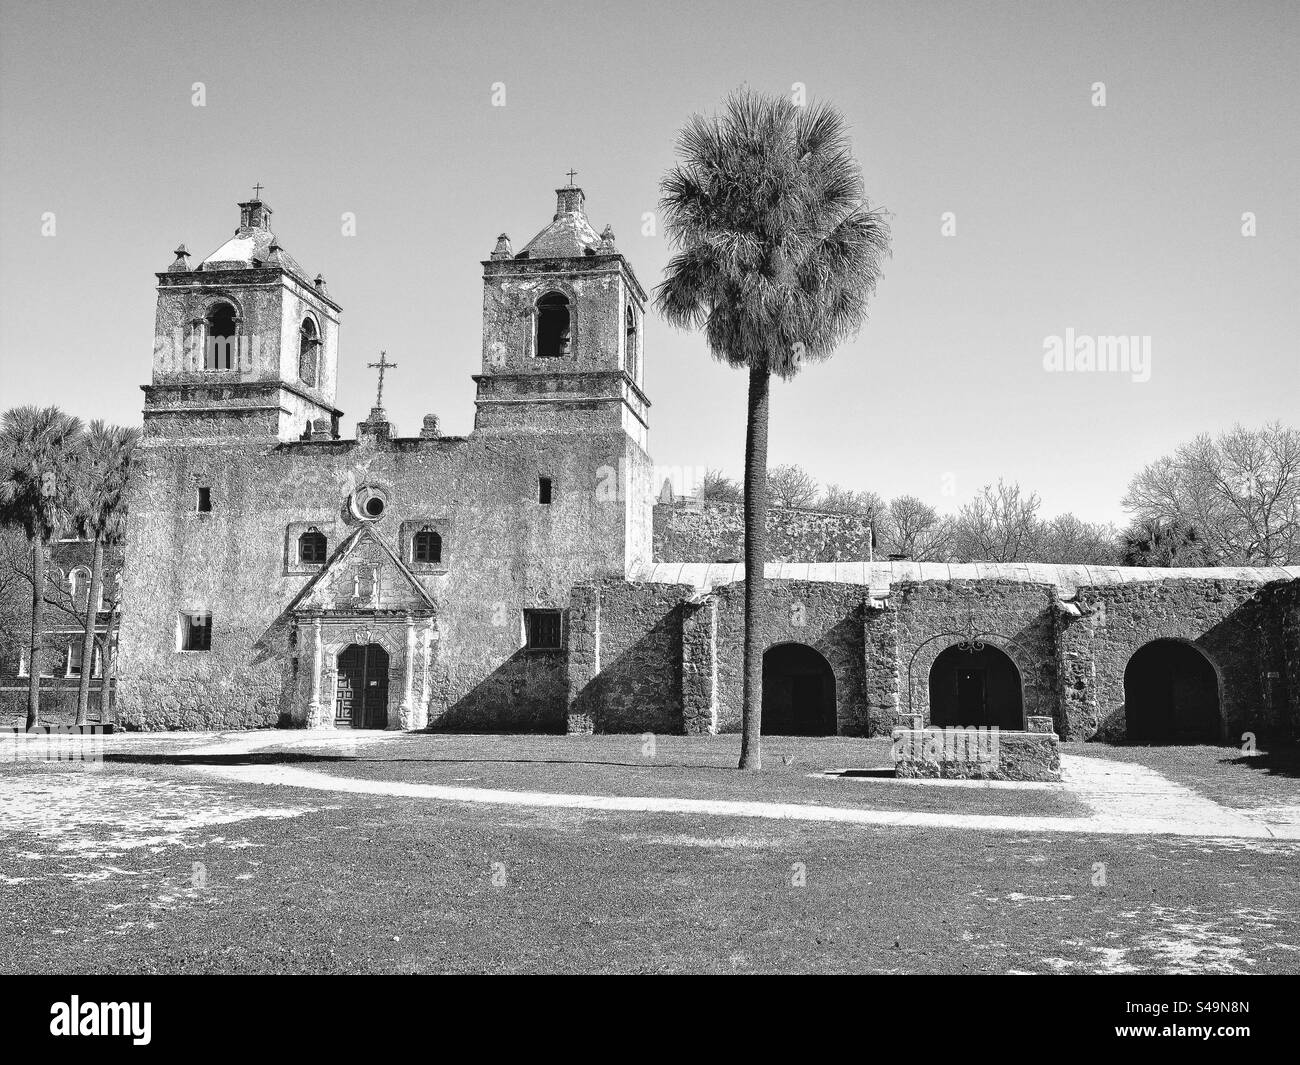 Exterior view of Mission Concepcion at San Antonio Missions National Historical Park in Texas, USA.  UNESCO World Heritage Site. Black and white filter. Stock Photo